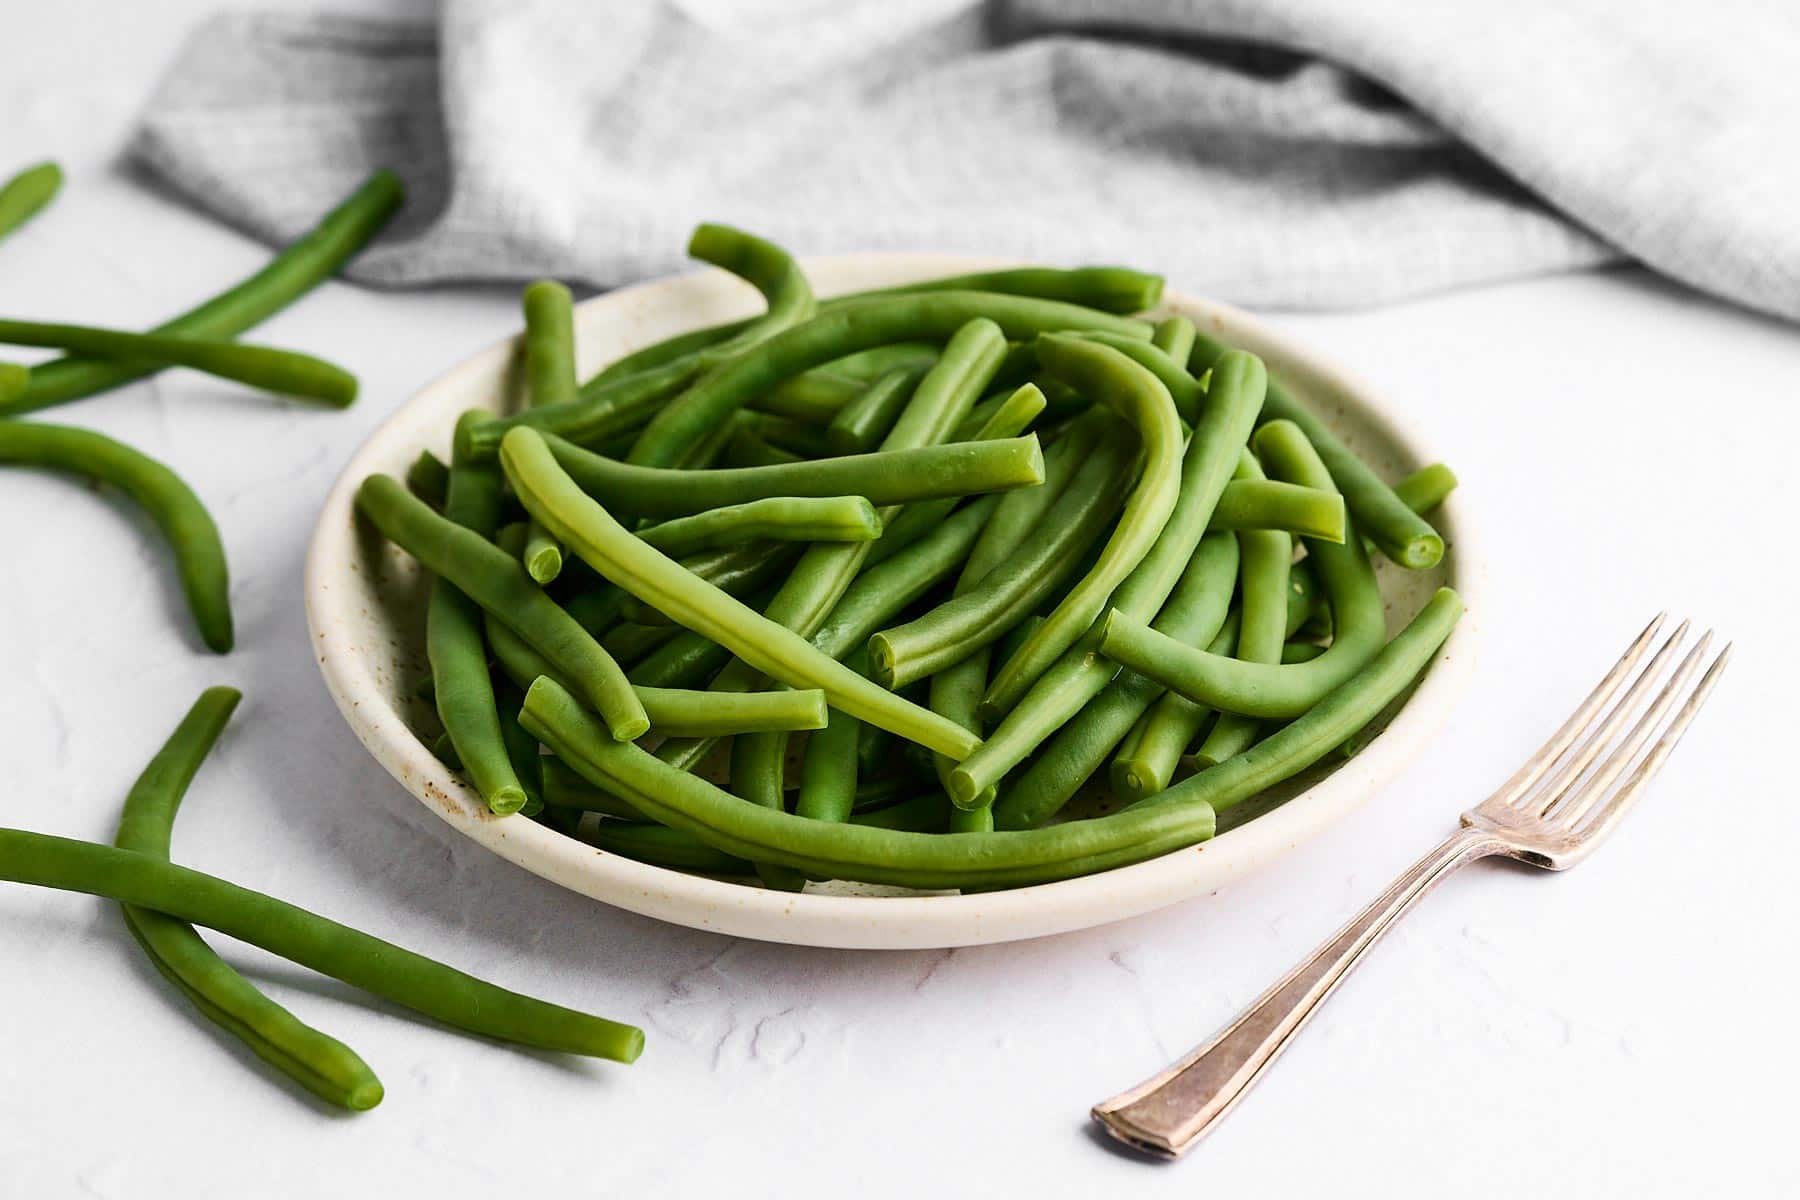 Blanched green beans.